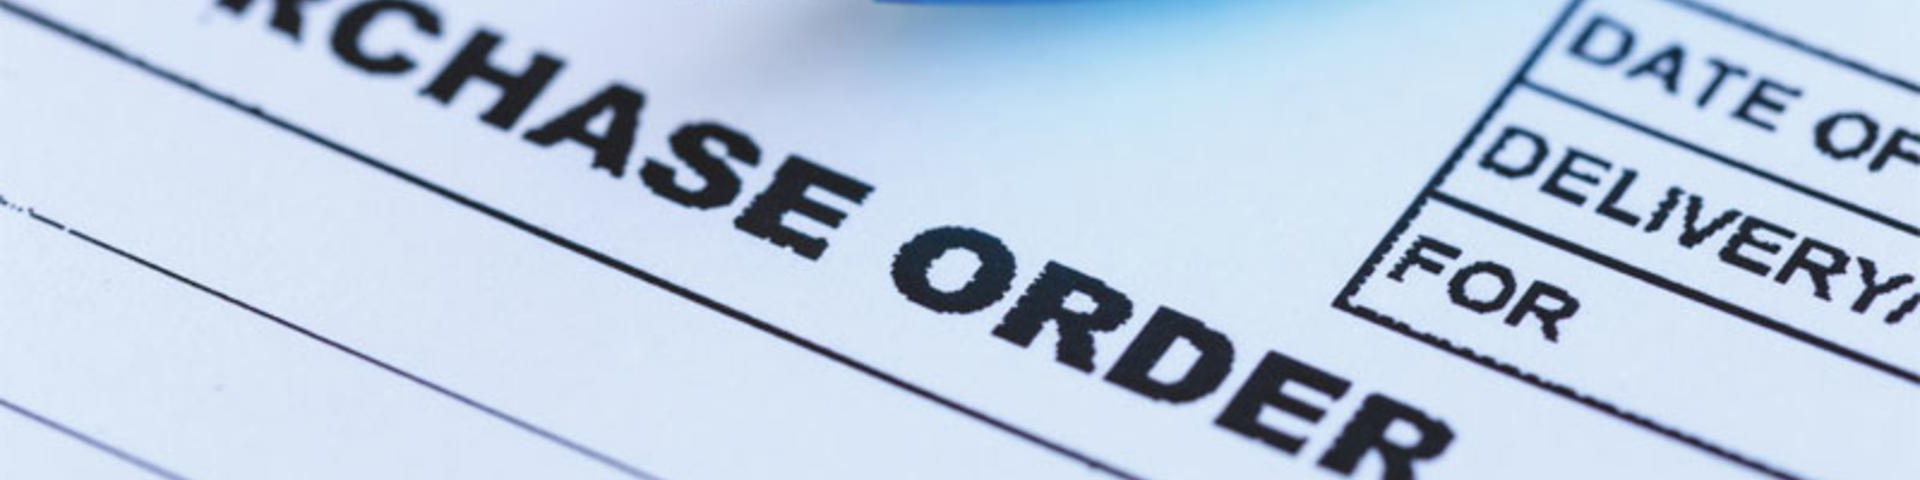 purchase order with blue pen in the office